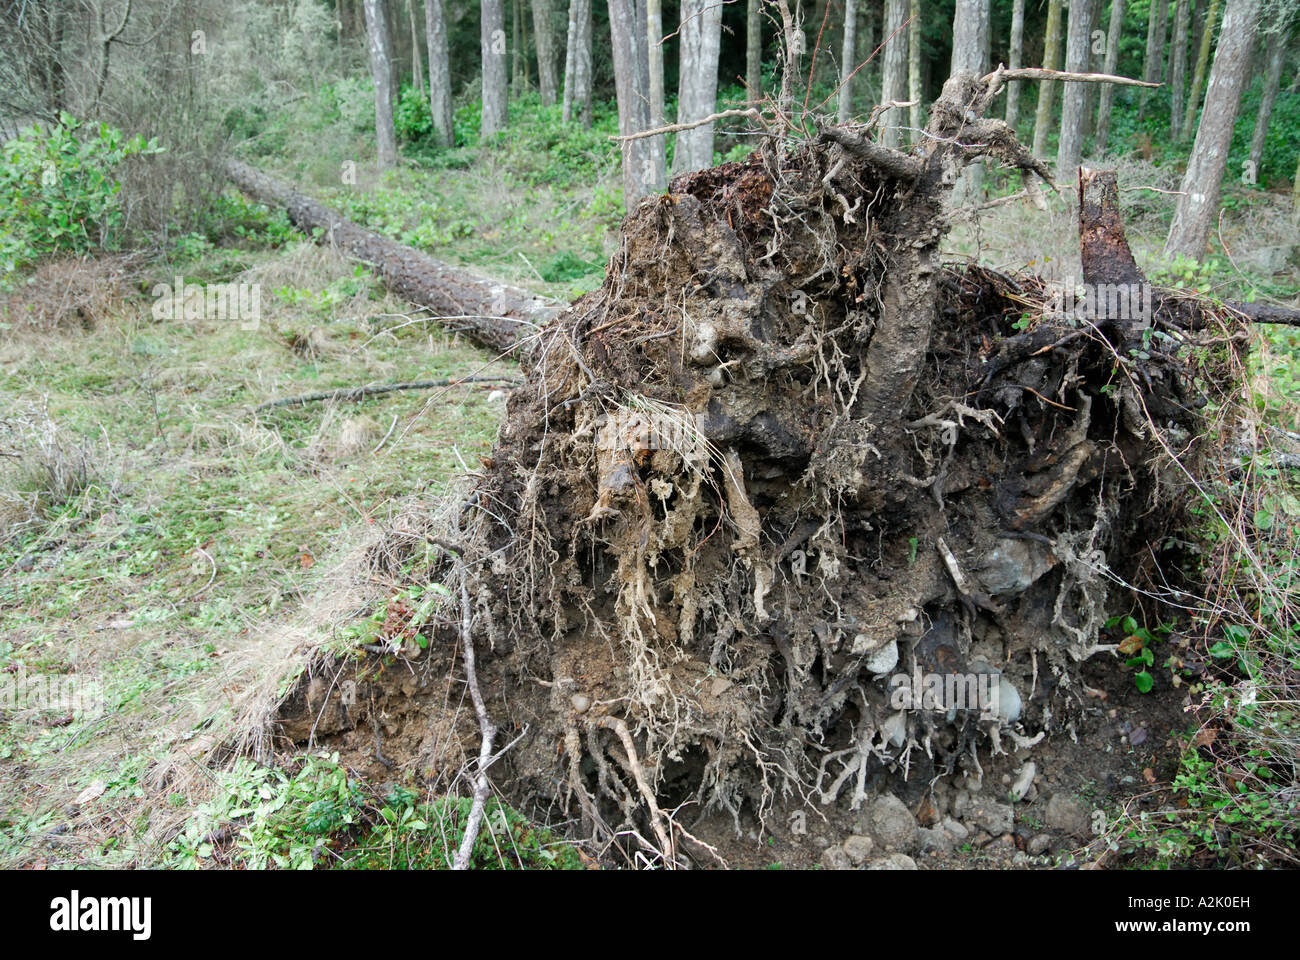 'Fir tree 'knocked down' by storm'. Stock Photo